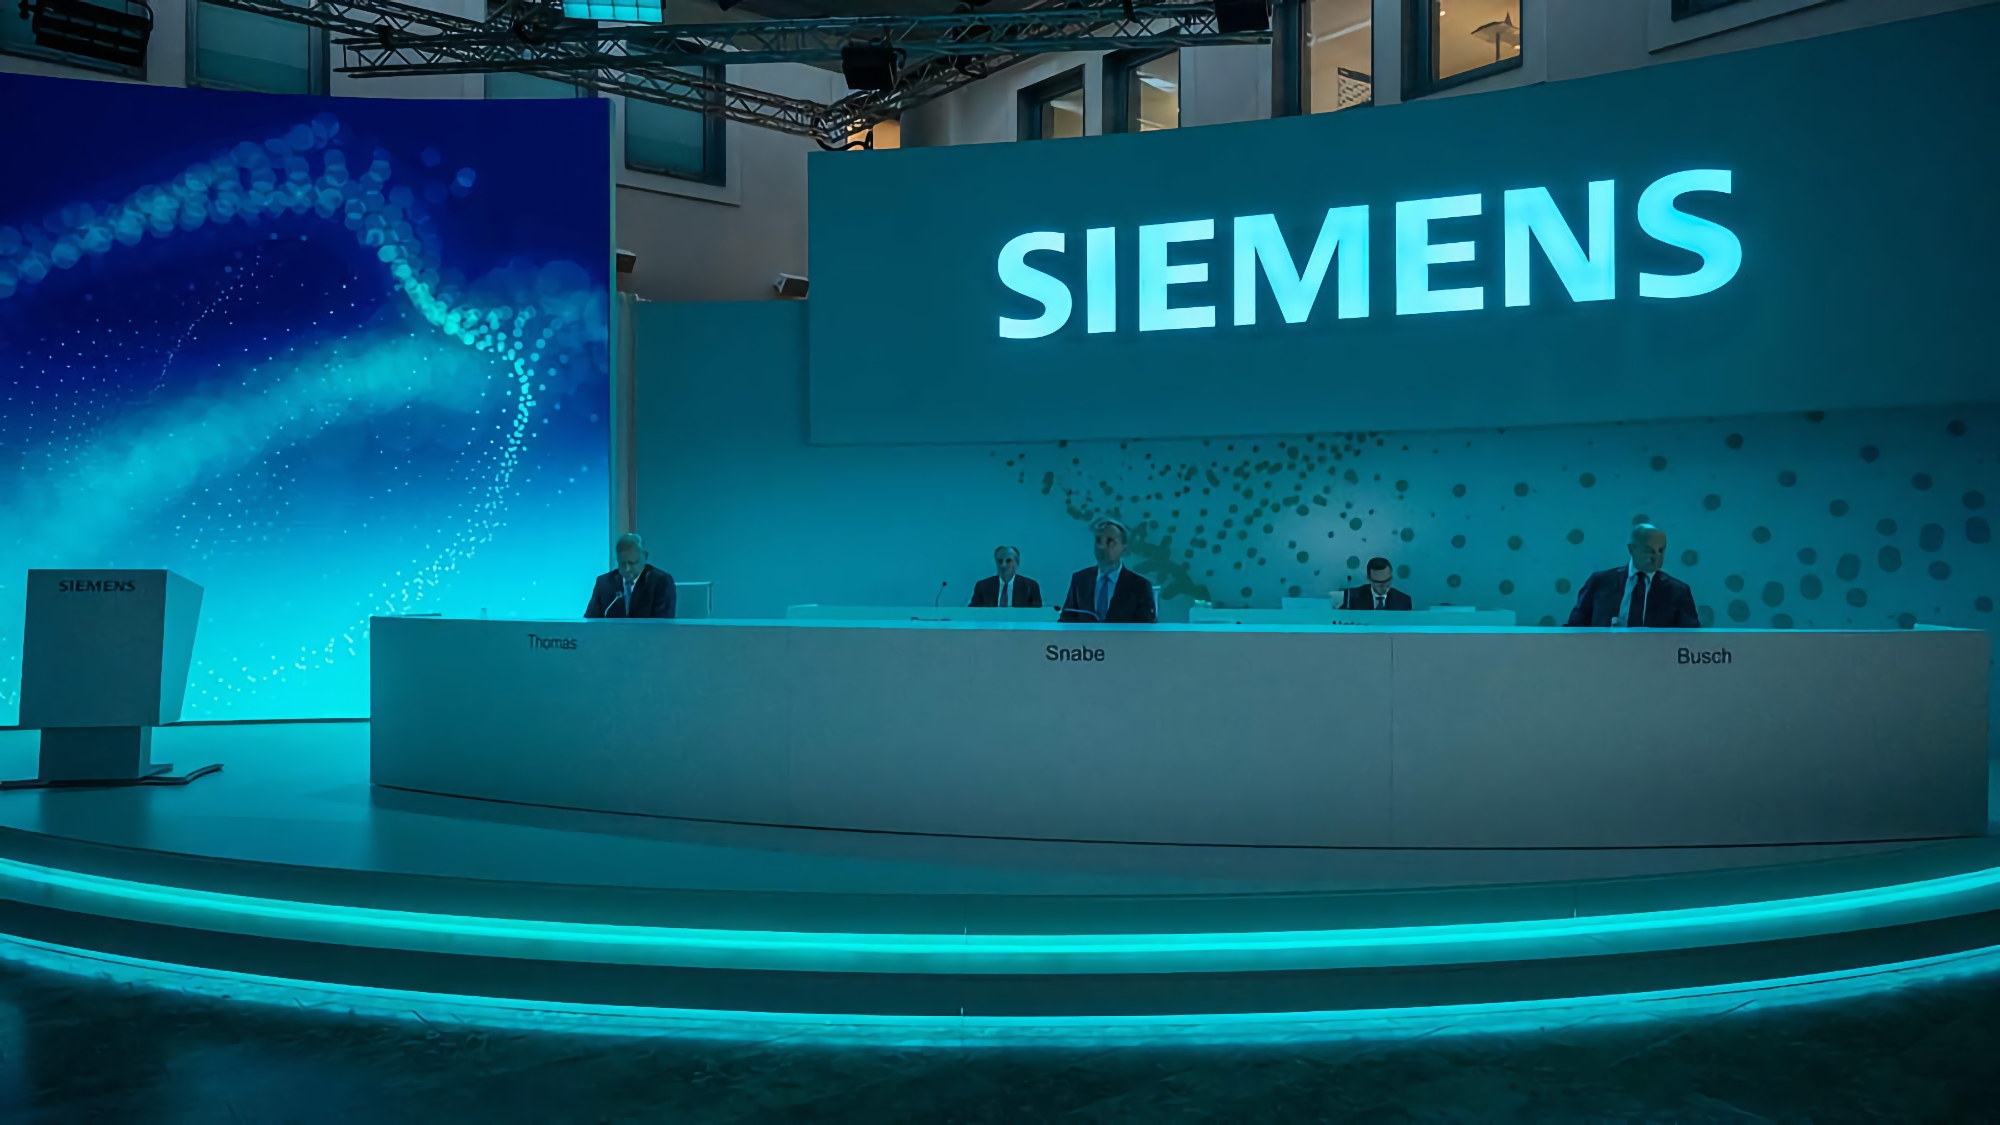 The German company Siemens condemned the war in Ukraine and announced its withdrawal from the Russian market